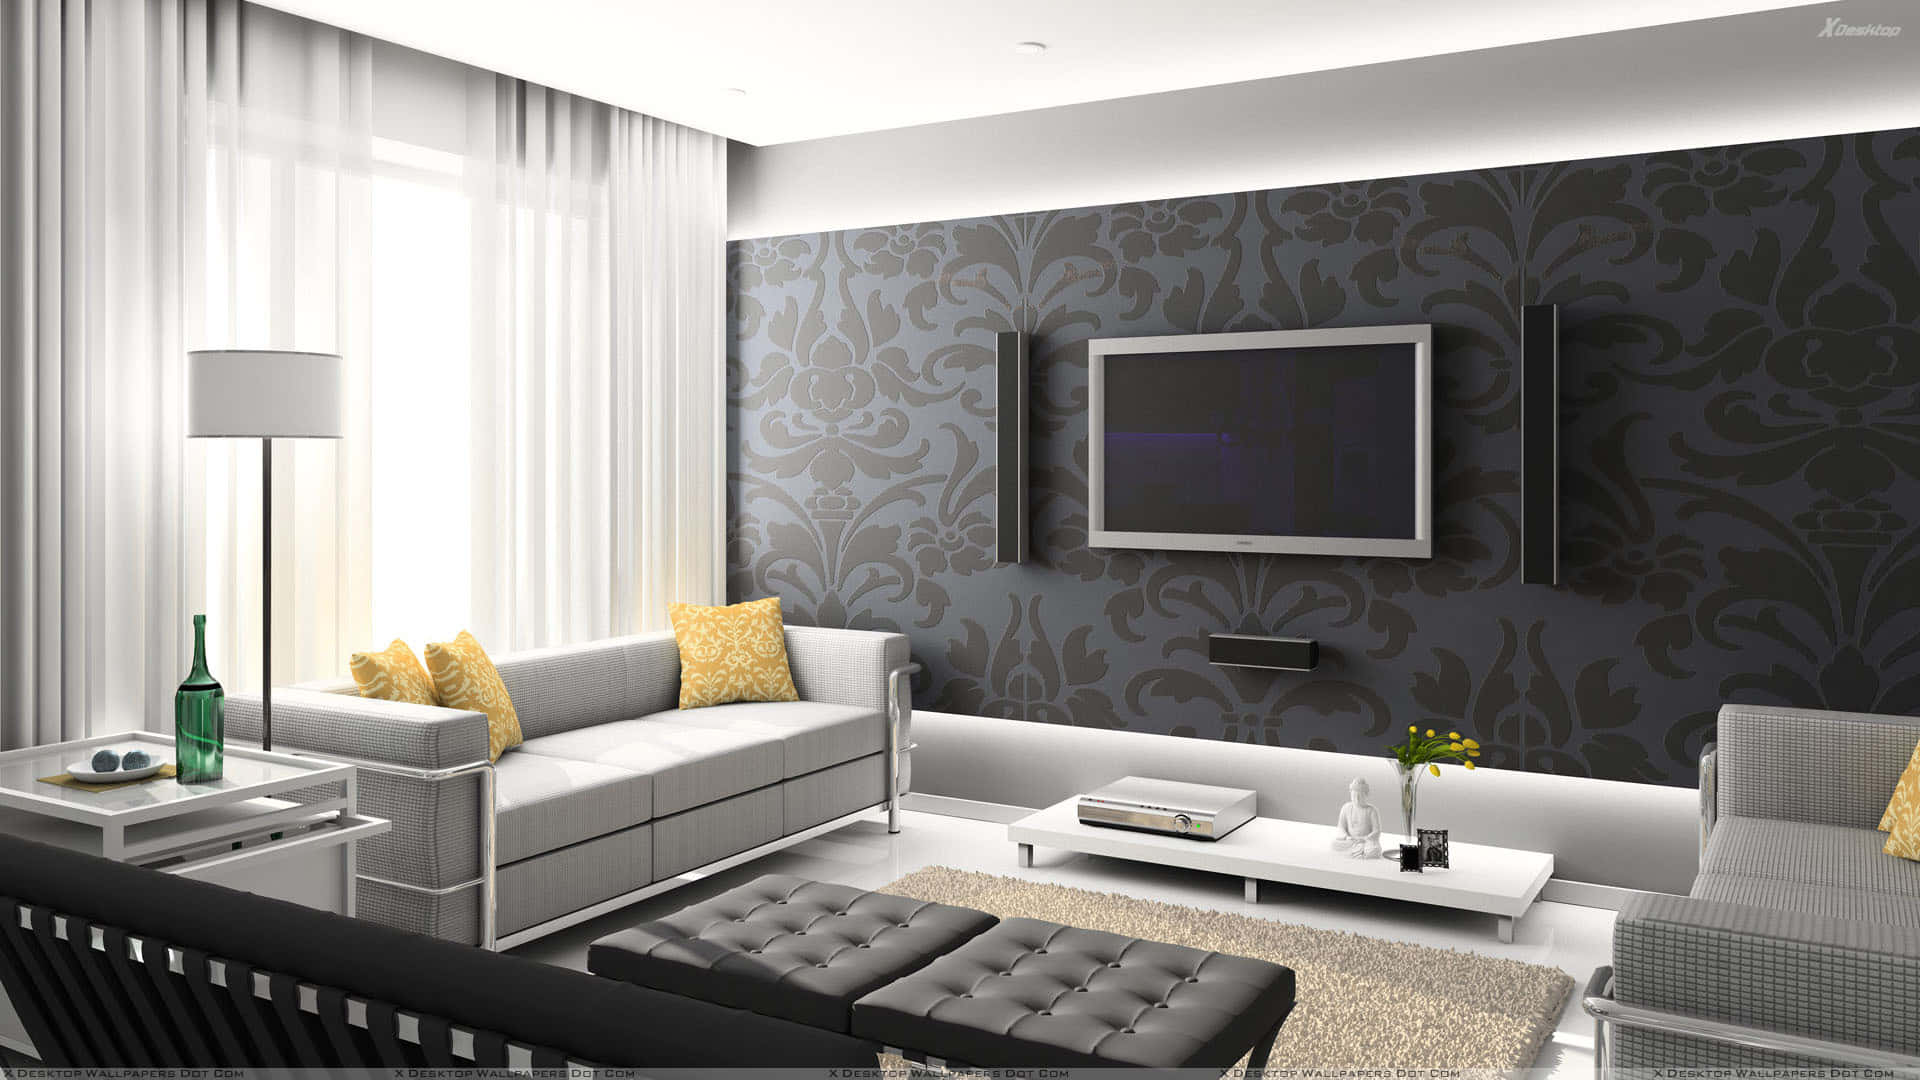 Enjoy Immersive High-Definition Audio and Visual Experiences with Home Cinema Wallpaper